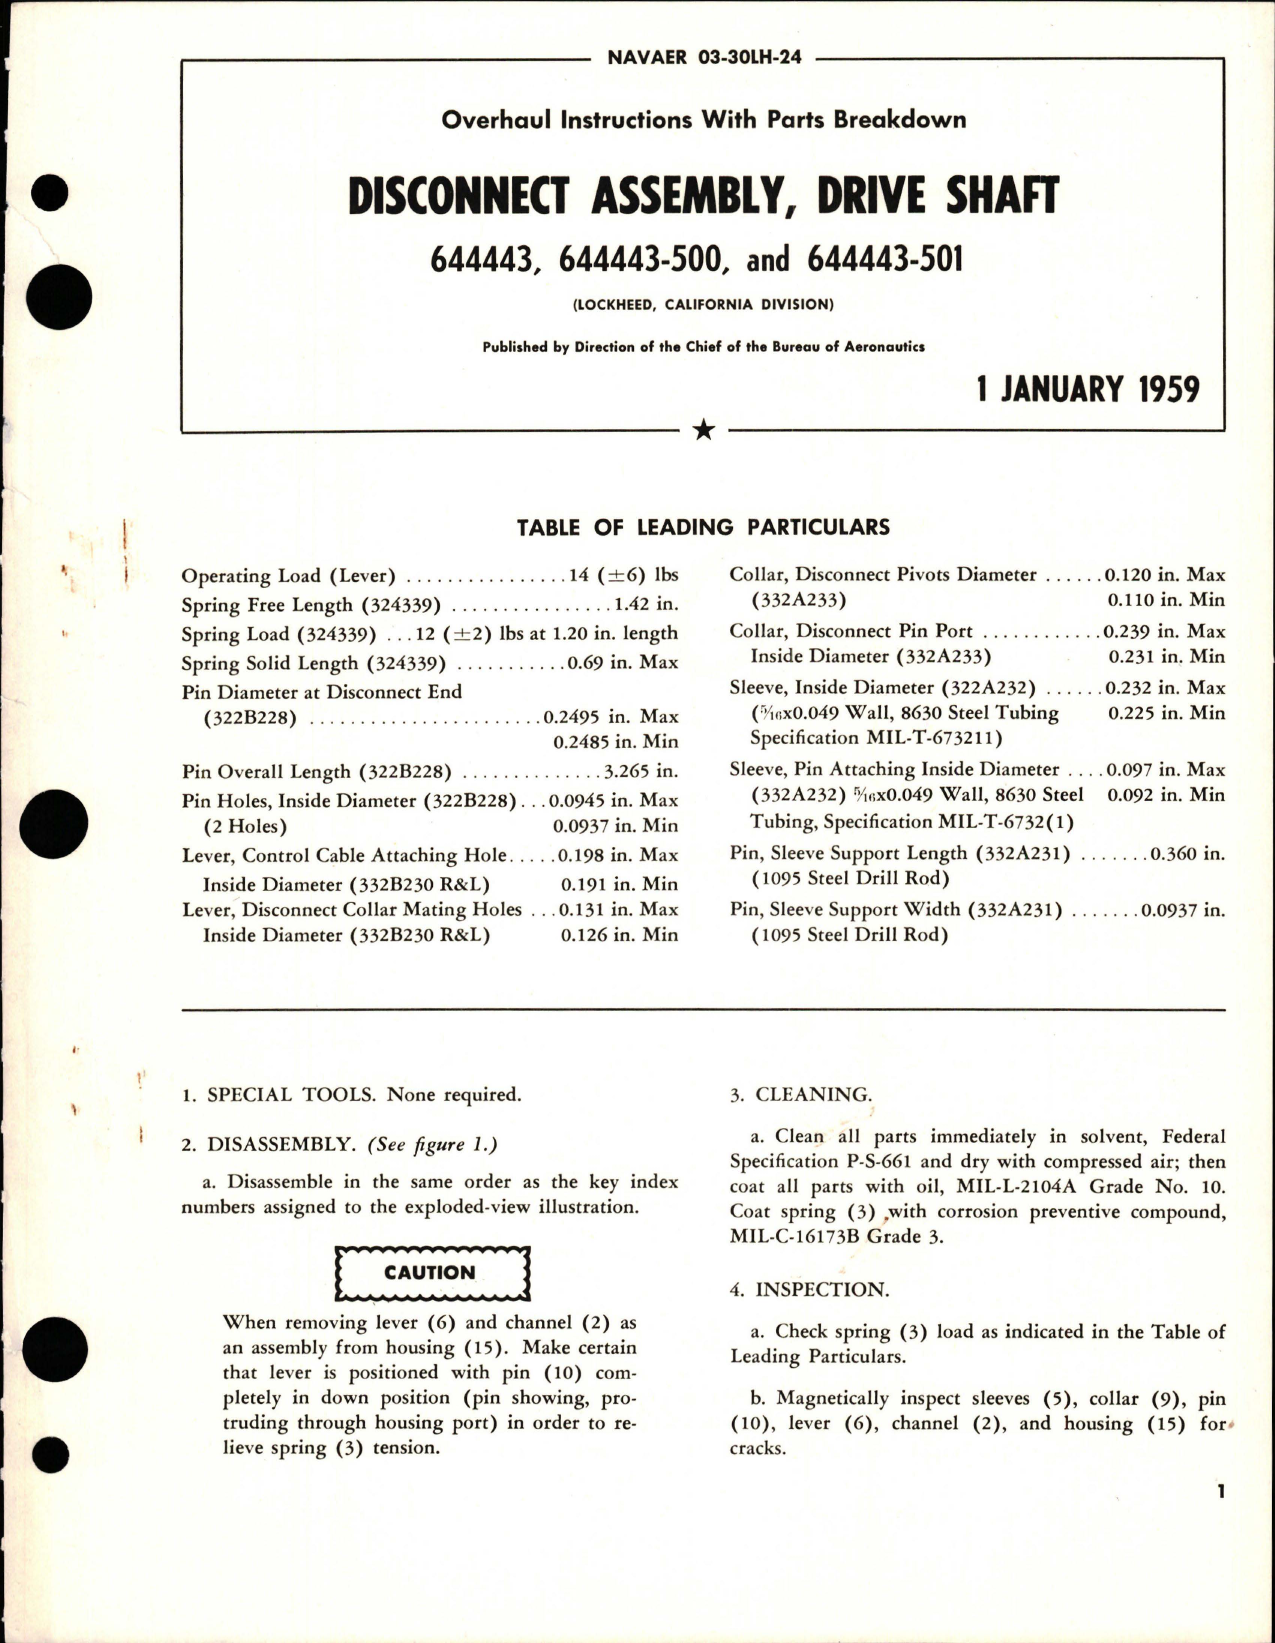 Sample page 1 from AirCorps Library document: Overhaul Instructions with Parts Breakdown for Drive Shaft Disconnect Assembly - 644443, 644443-500, and 644443-501